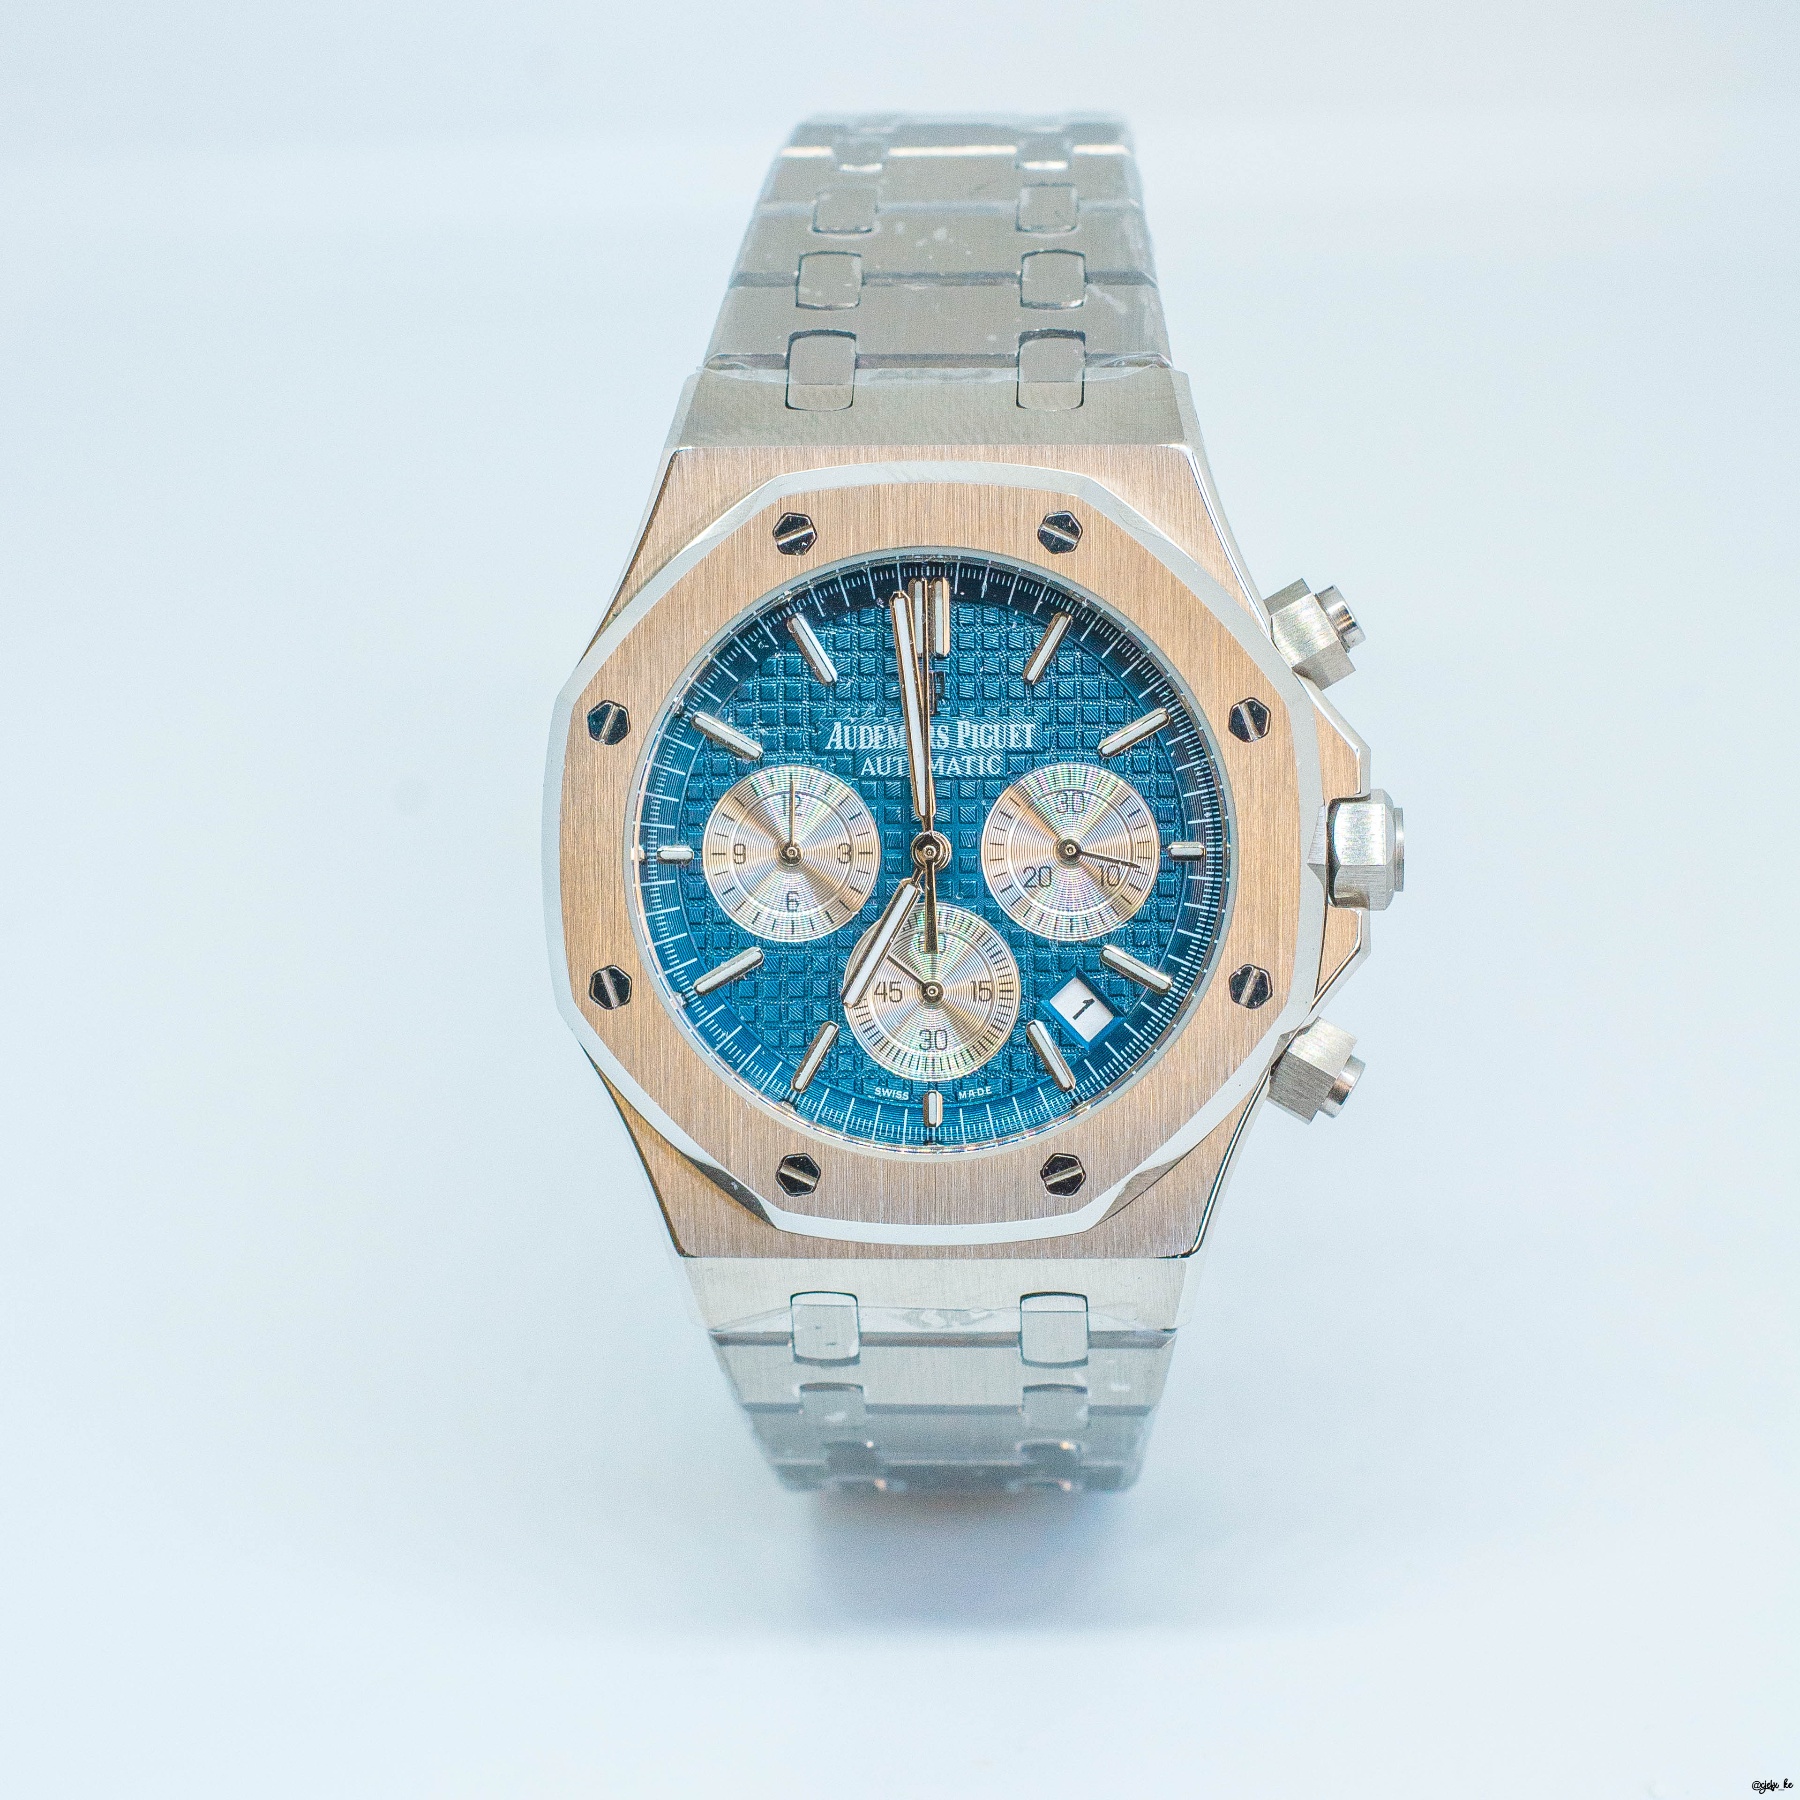 Buy this Audemars Piguet Royal Oak Blue Dial Chronograph Gents Watch at trendsasa,your no.1 online shop for luxury watches in Nairobi Kenya.